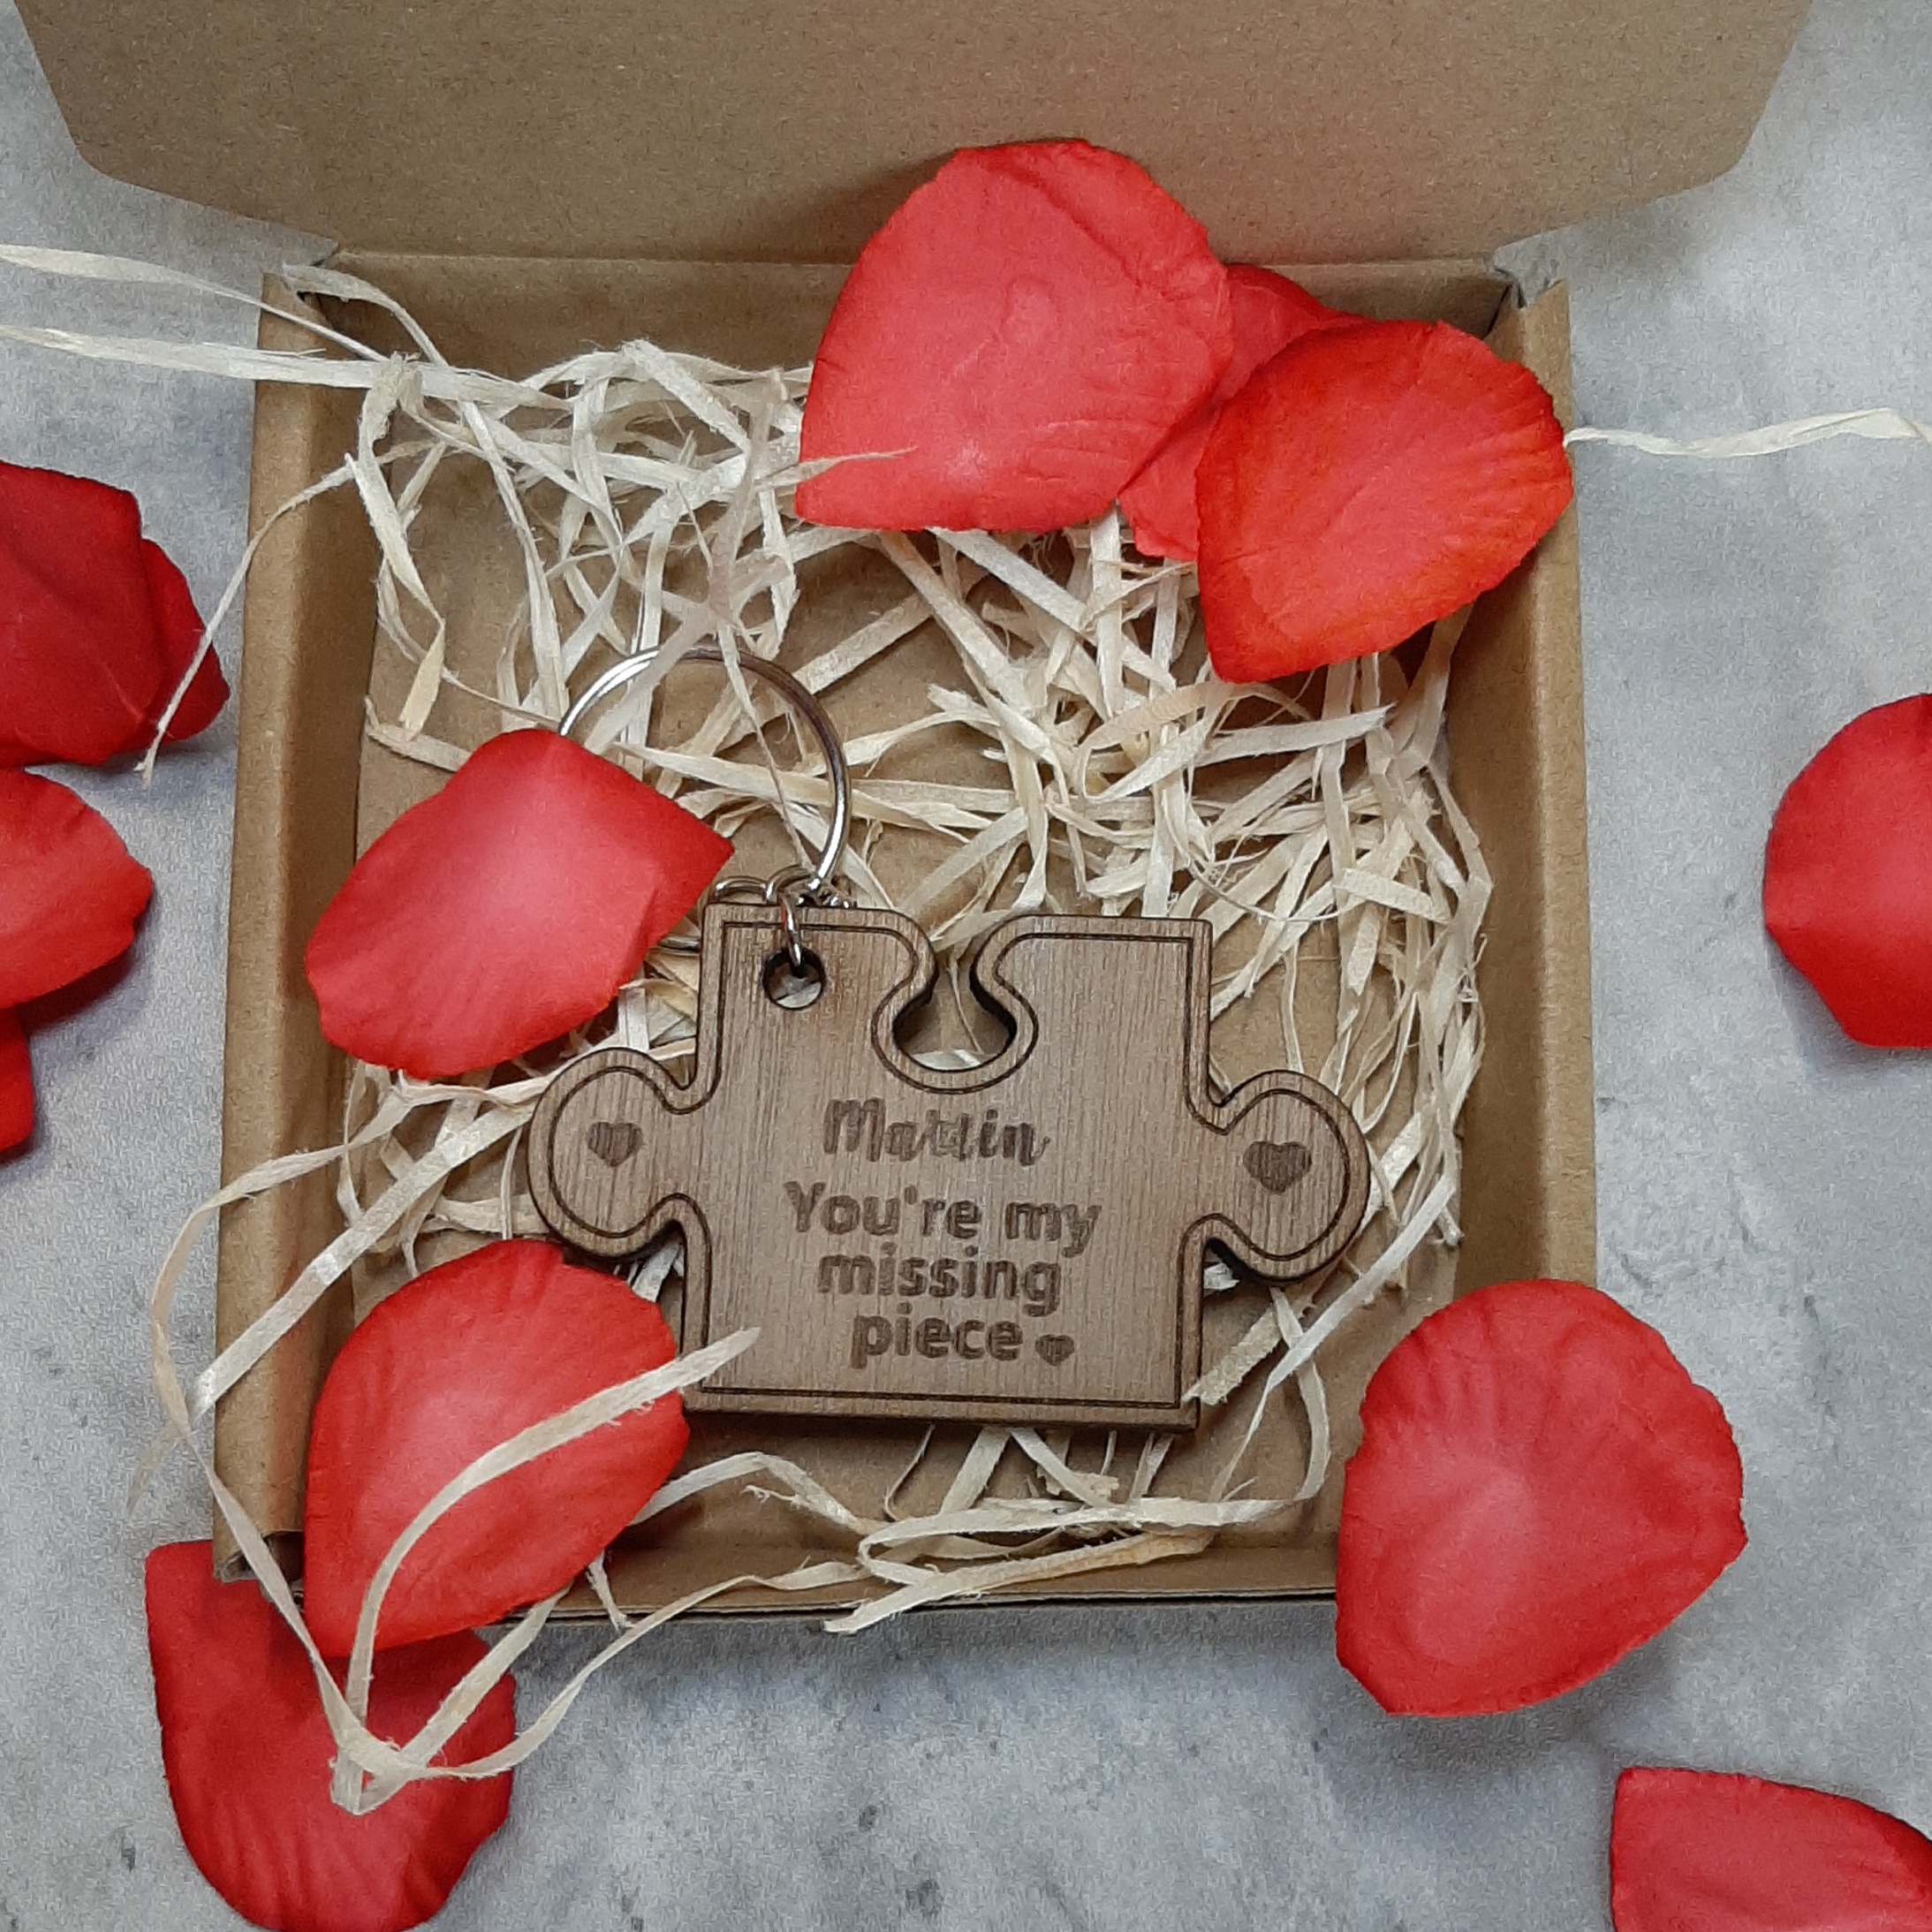 Missing Piece Puzzle Keyring surrounded by rose petals for valentines day, laser engraved with you're my missing piece - in box with straw